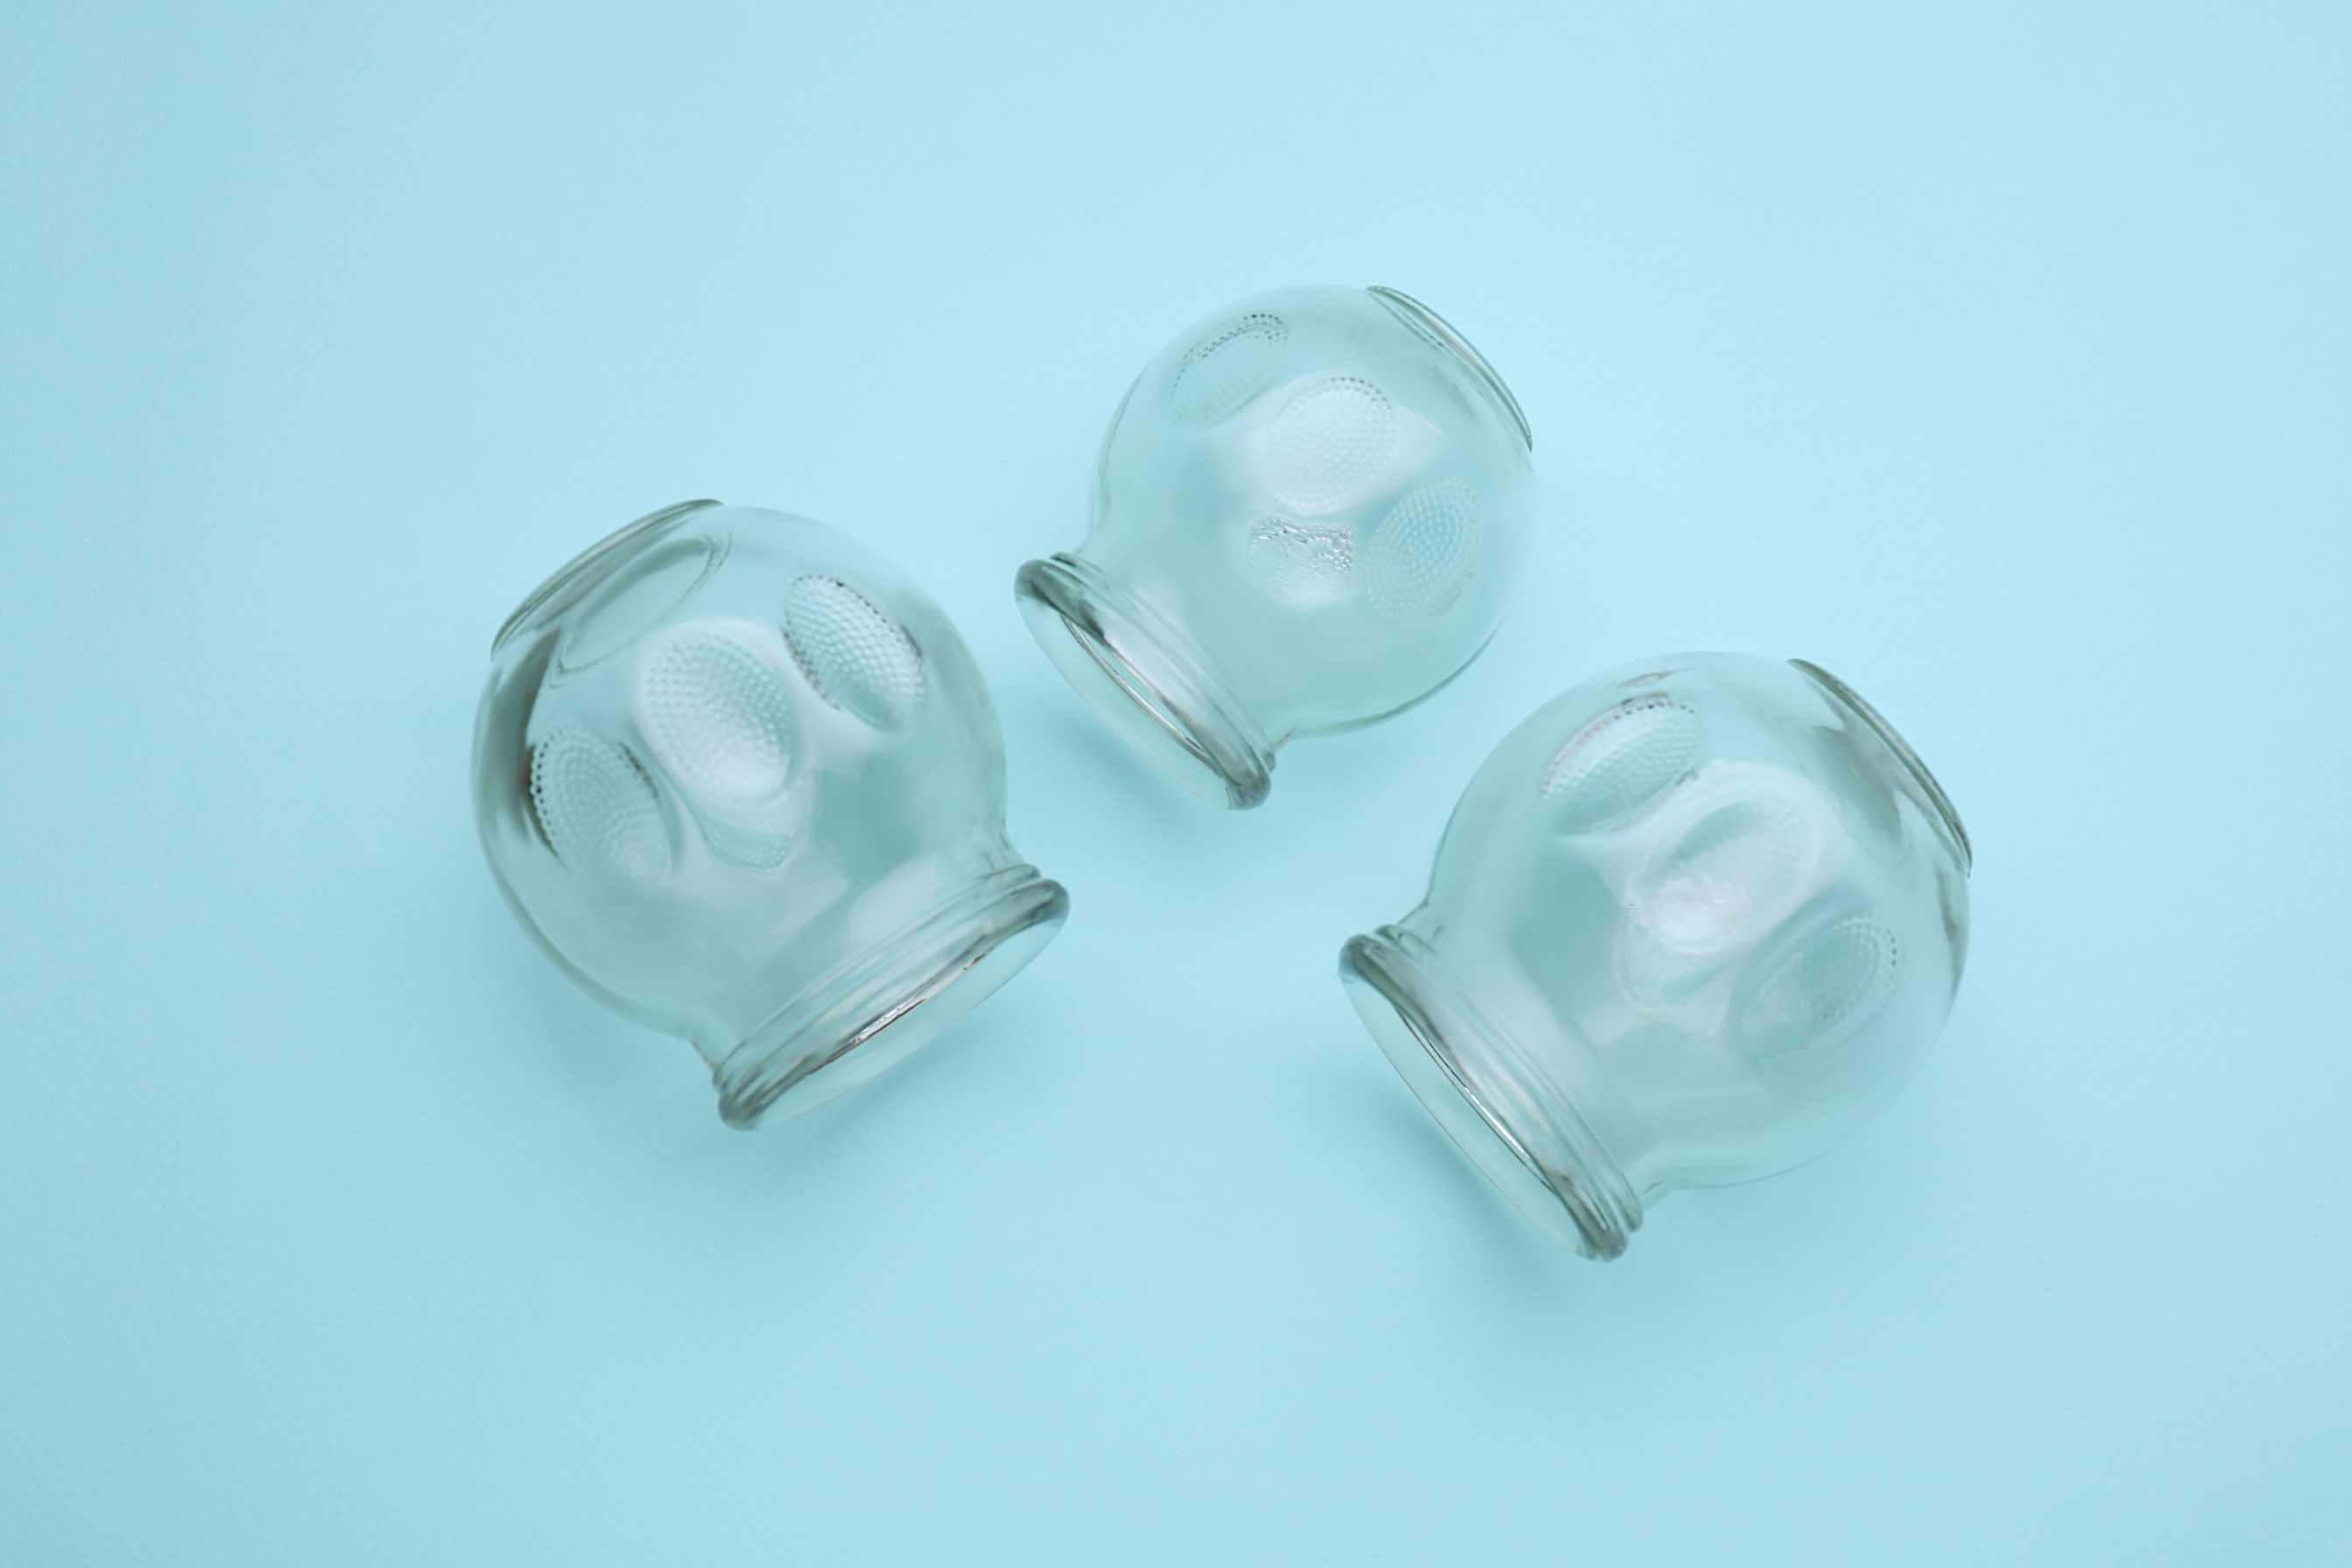 Glass Cups on Light Blue Background, Flat Lay. Cupping